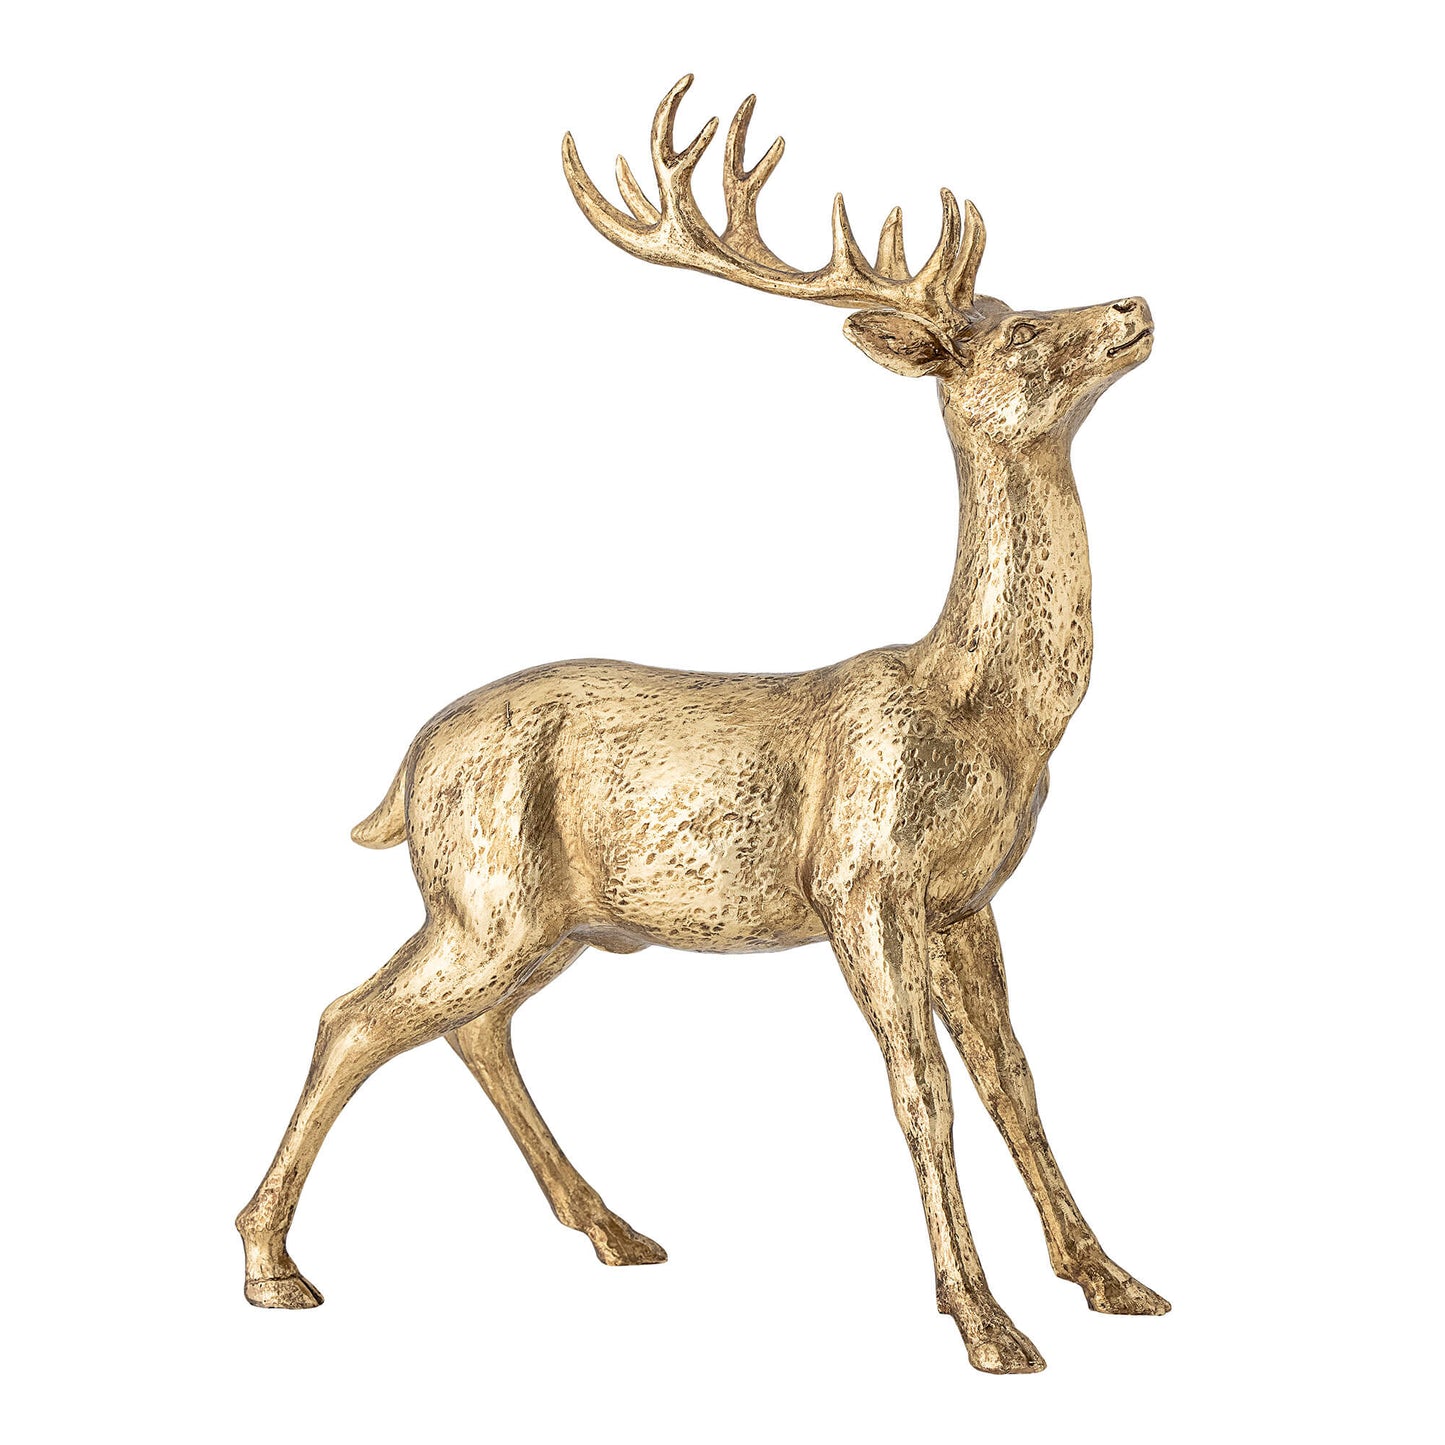 Keera Deer by Bloomingville standing upright, perfect for Christmas decoration. Made of polyresin in a beautiful gold look. Size: 36.5cm in height, 27cm in length, and 11cm in width. Style with small decorative trees and candlesticks for a festive windowsill display.